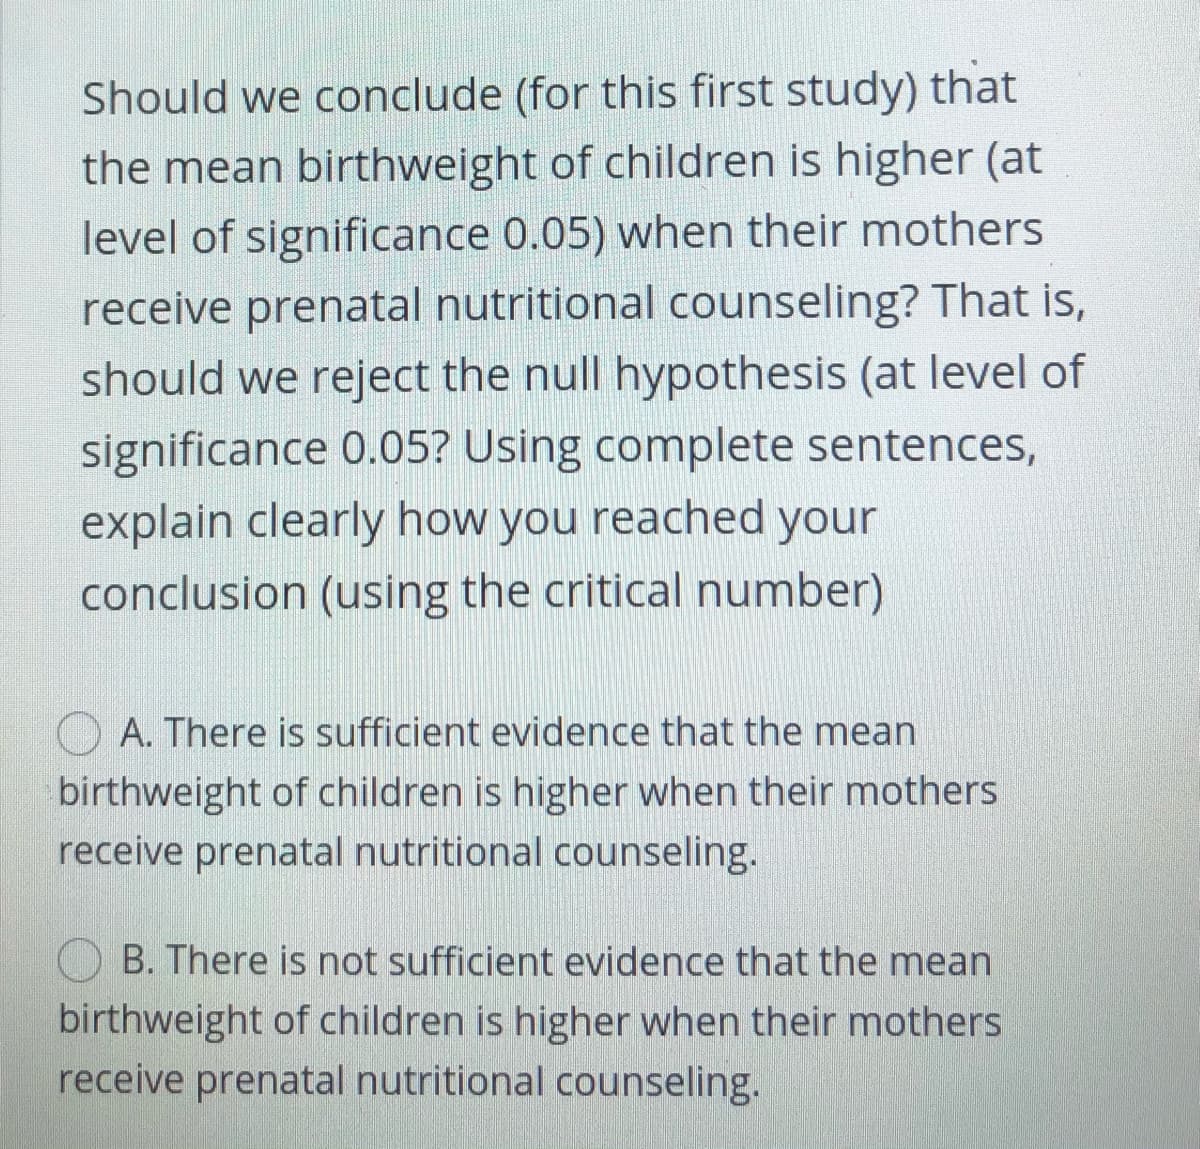 Should we conclude (for this first study) that
the mean birthweight of children is higher (at
level of significance 0.05) when their mothers
receive prenatal nutritional counseling? That is,
should we reject the null hypothesis (at level of
significance 0.05? Using complete sentences,
explain clearly how you reached your
conclusion (using the critical number)
A. There is sufficient evidence that the mean
birthweight of children is higher when their mothers
receive prenatal nutritional counseling.
B. There is not sufficient evidence that the mean
birthweight of children is higher when their mothers
receive prenatal nutritional counseling.
